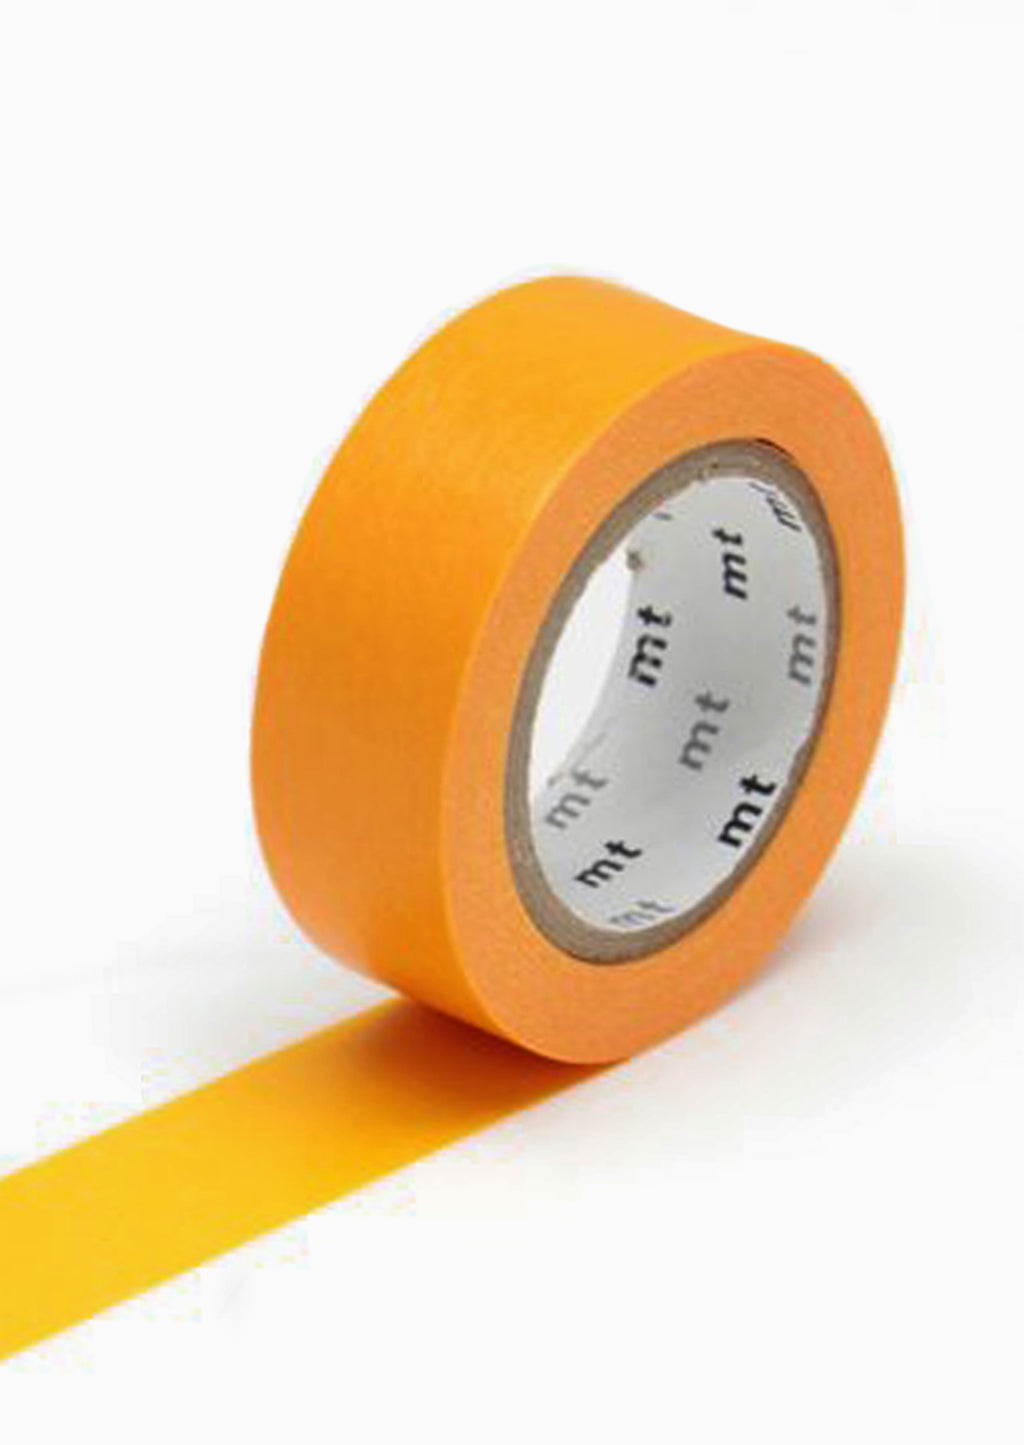 Carrot: A roll of washi tape in carrot orange.